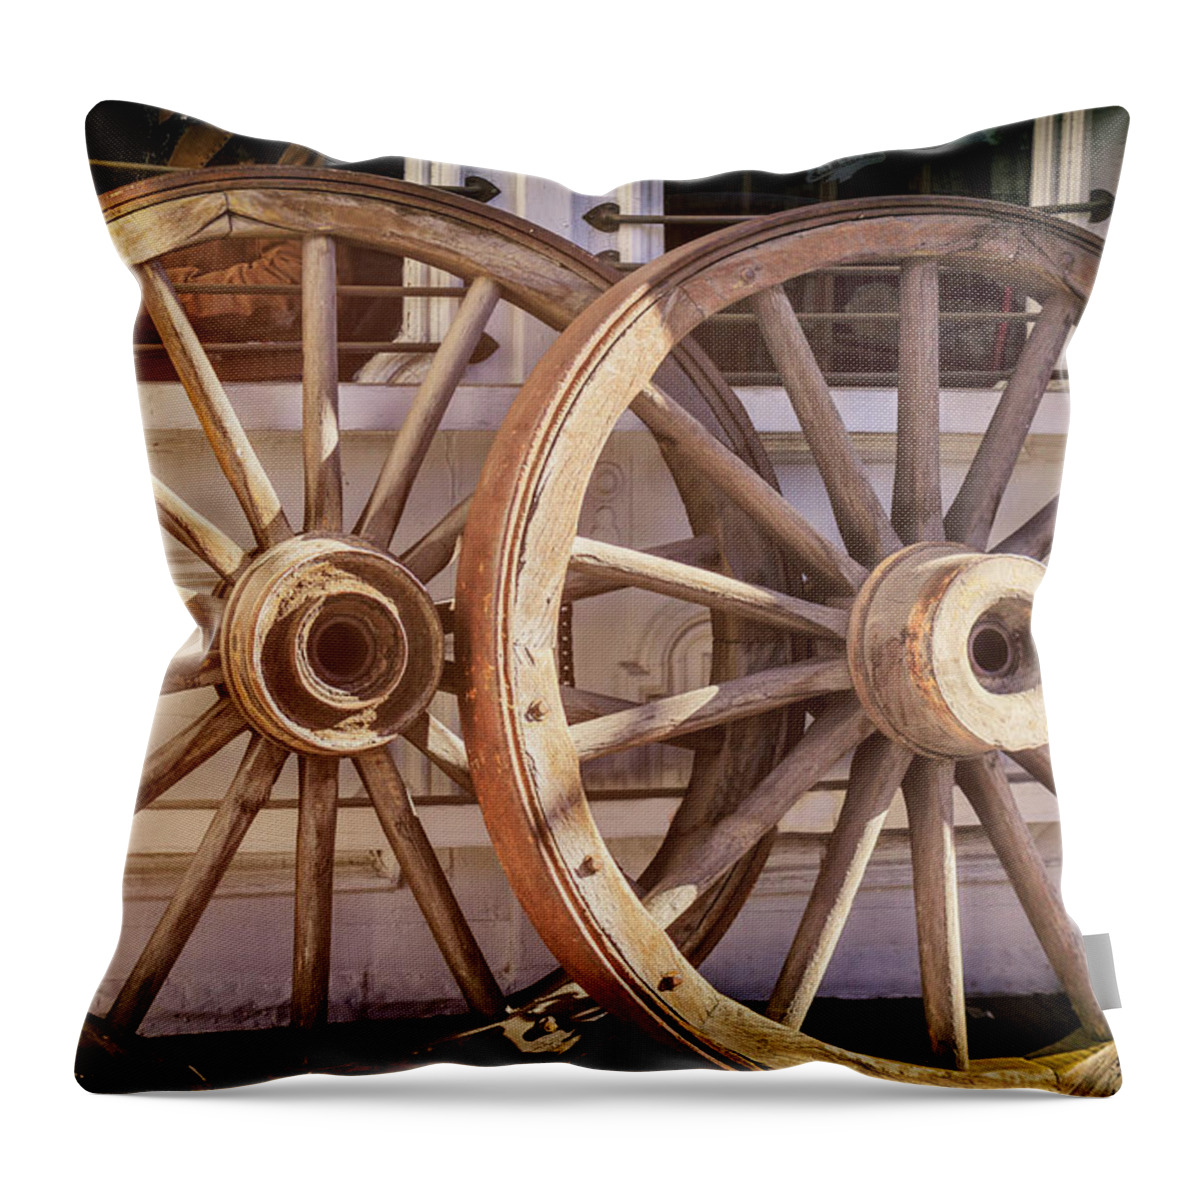 Wagon Throw Pillow featuring the photograph Vintage Wagon Wheels by James Eddy